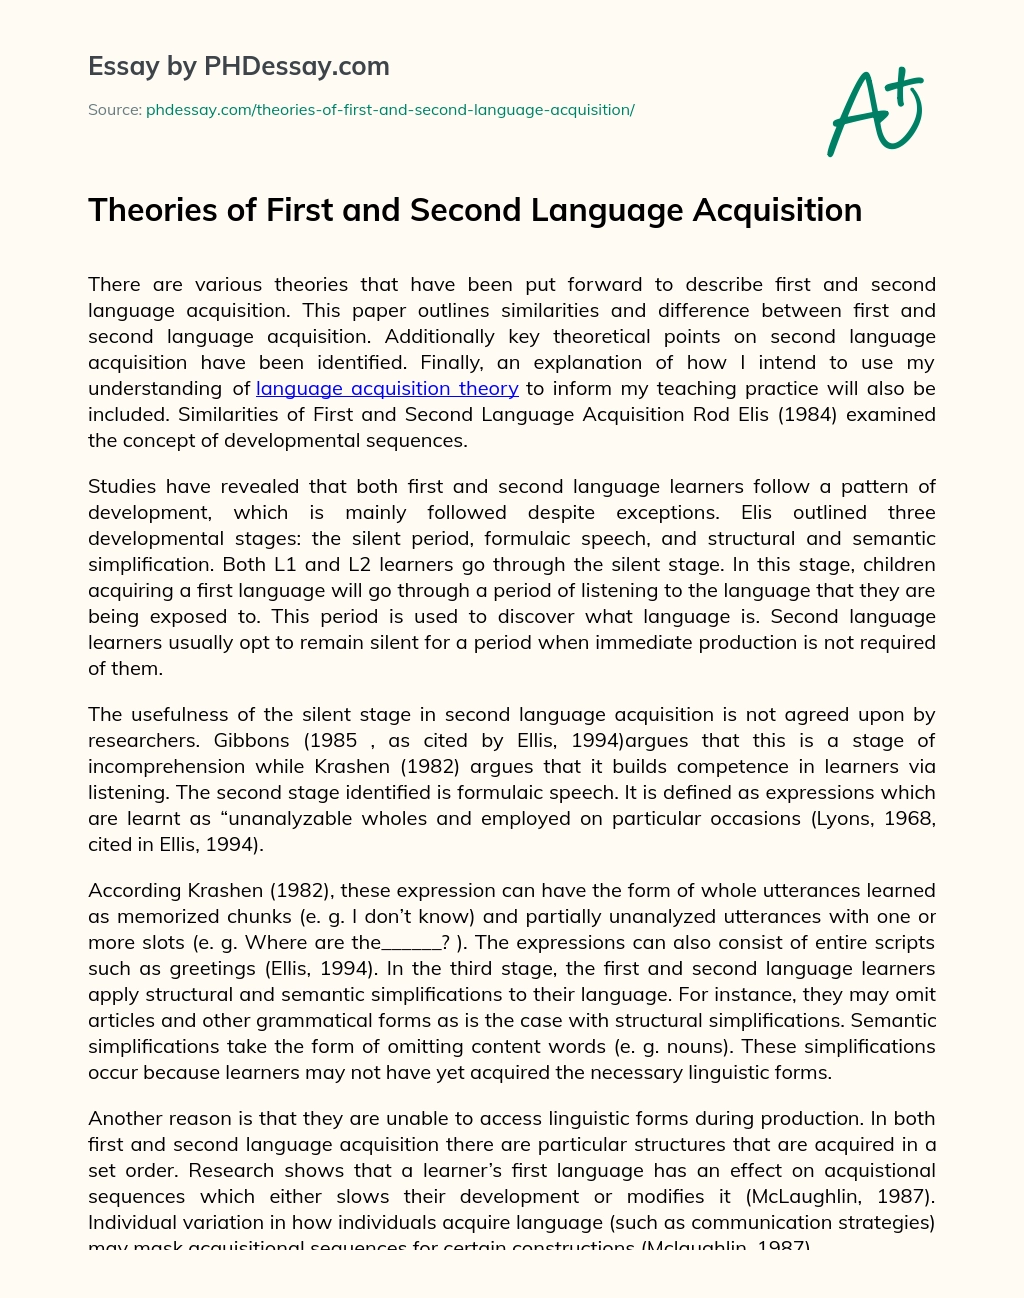 Theories of First and Second Language Acquisition essay